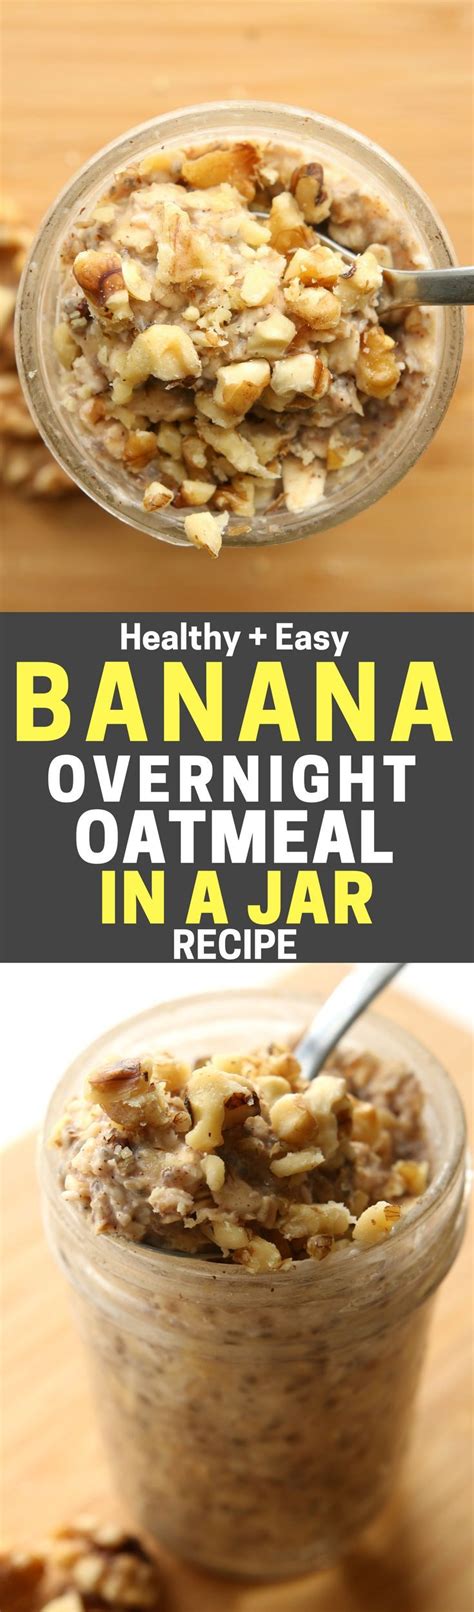 It's not only overnight oats, but you'll find all sorts of. Low Calorie Overnight Oats / Meal Prep Overnight Oats 3 ...